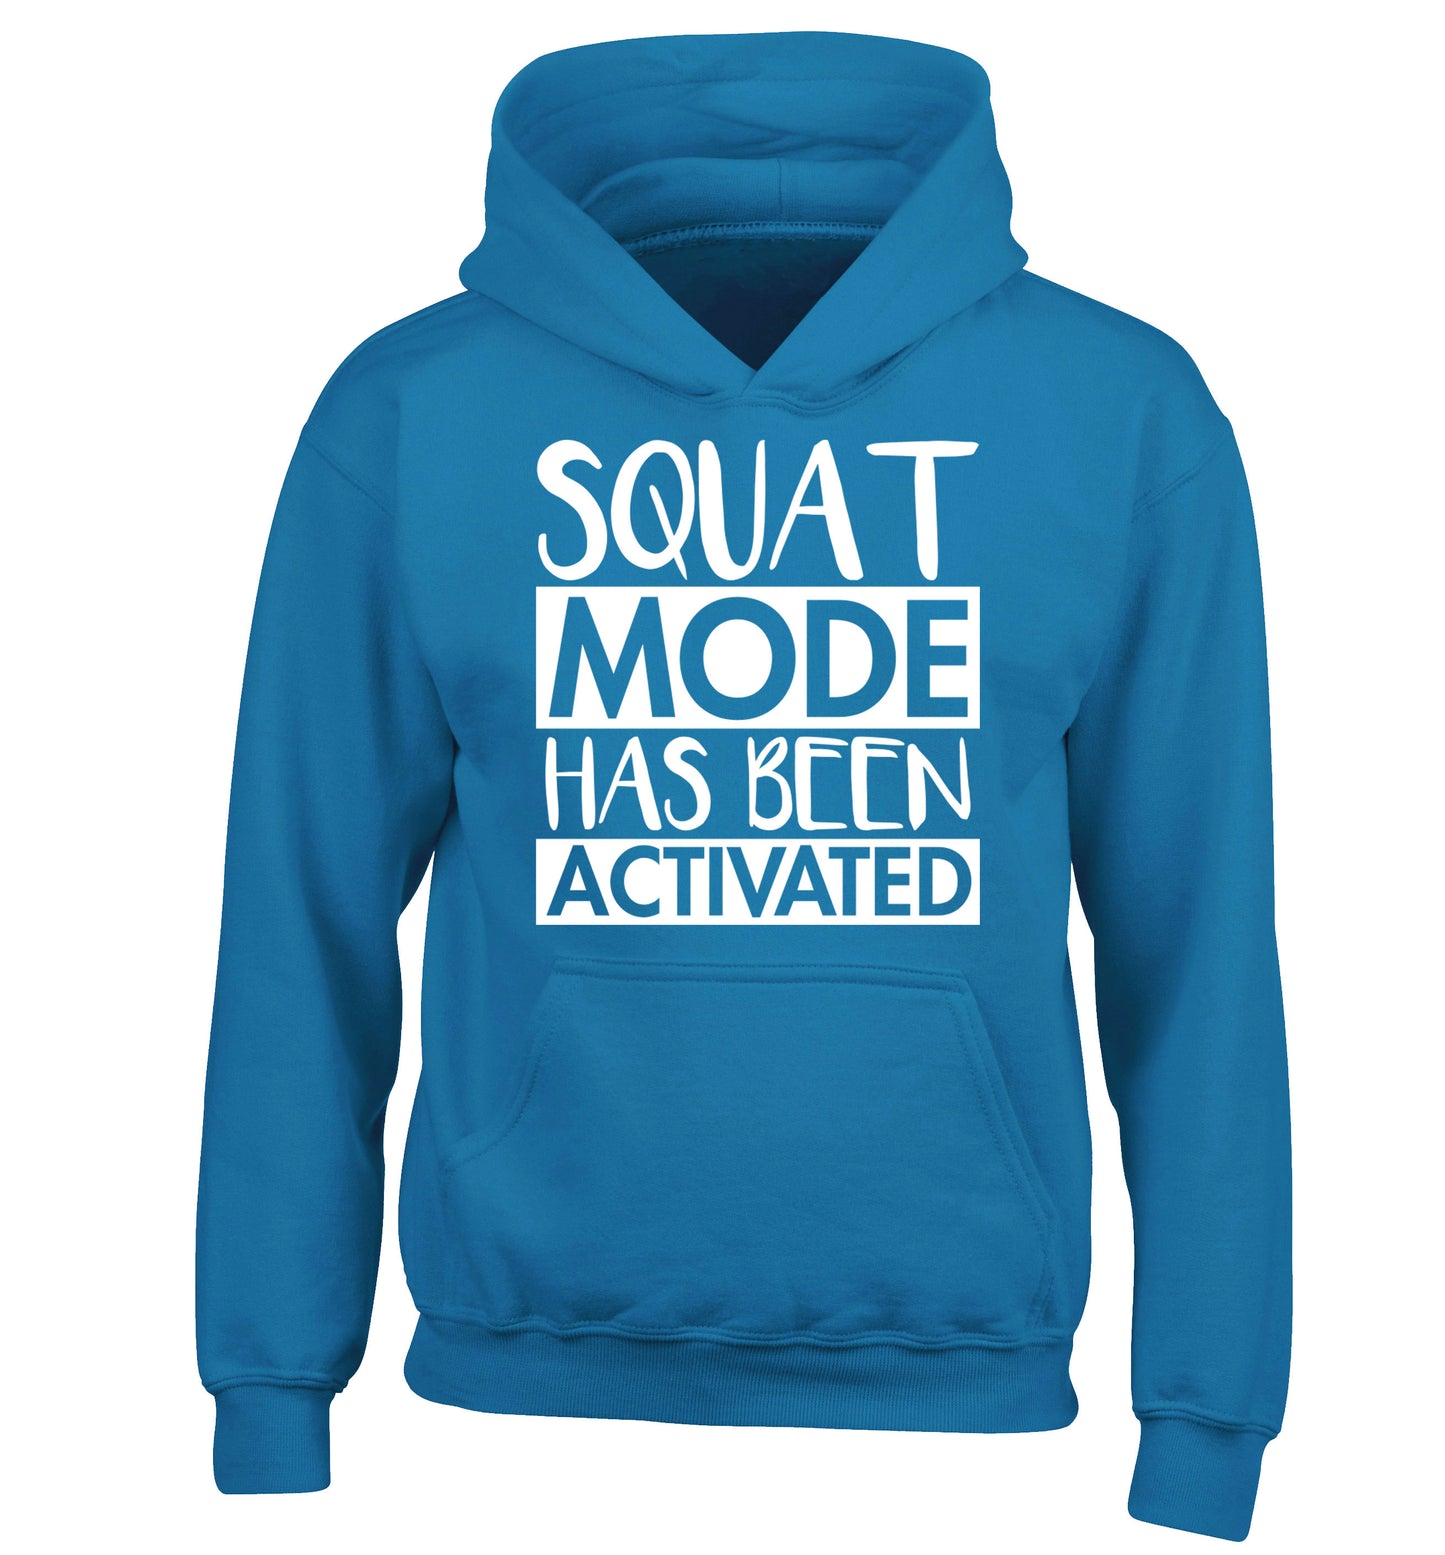 Squat mode activated children's blue hoodie 12-14 Years